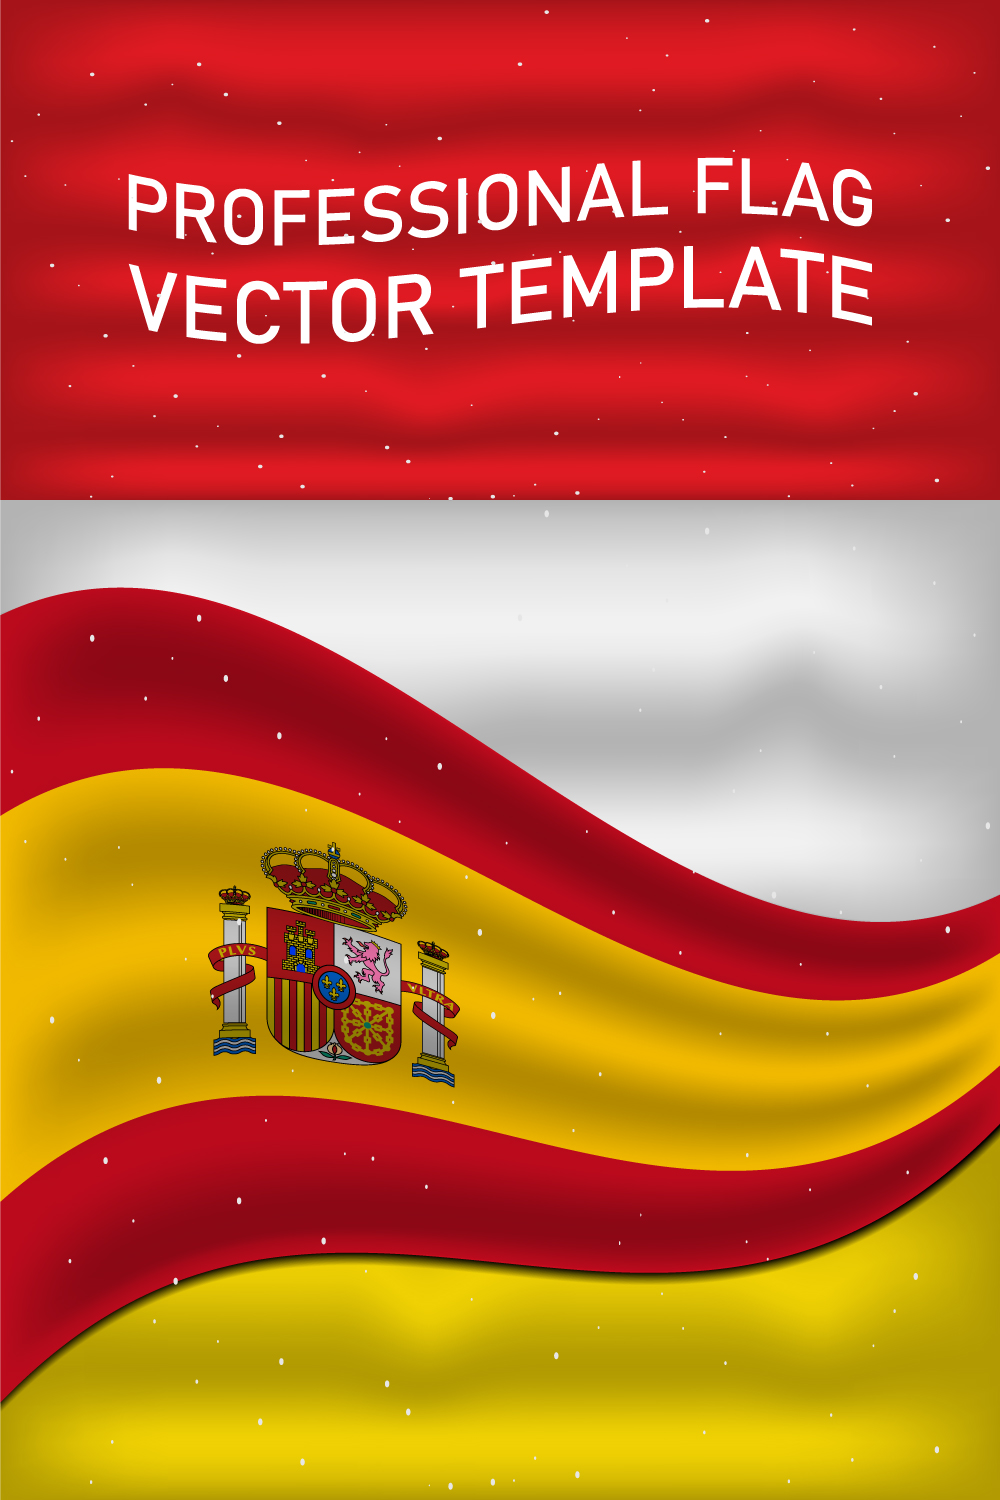 Exquisite image of the flag of Spain.